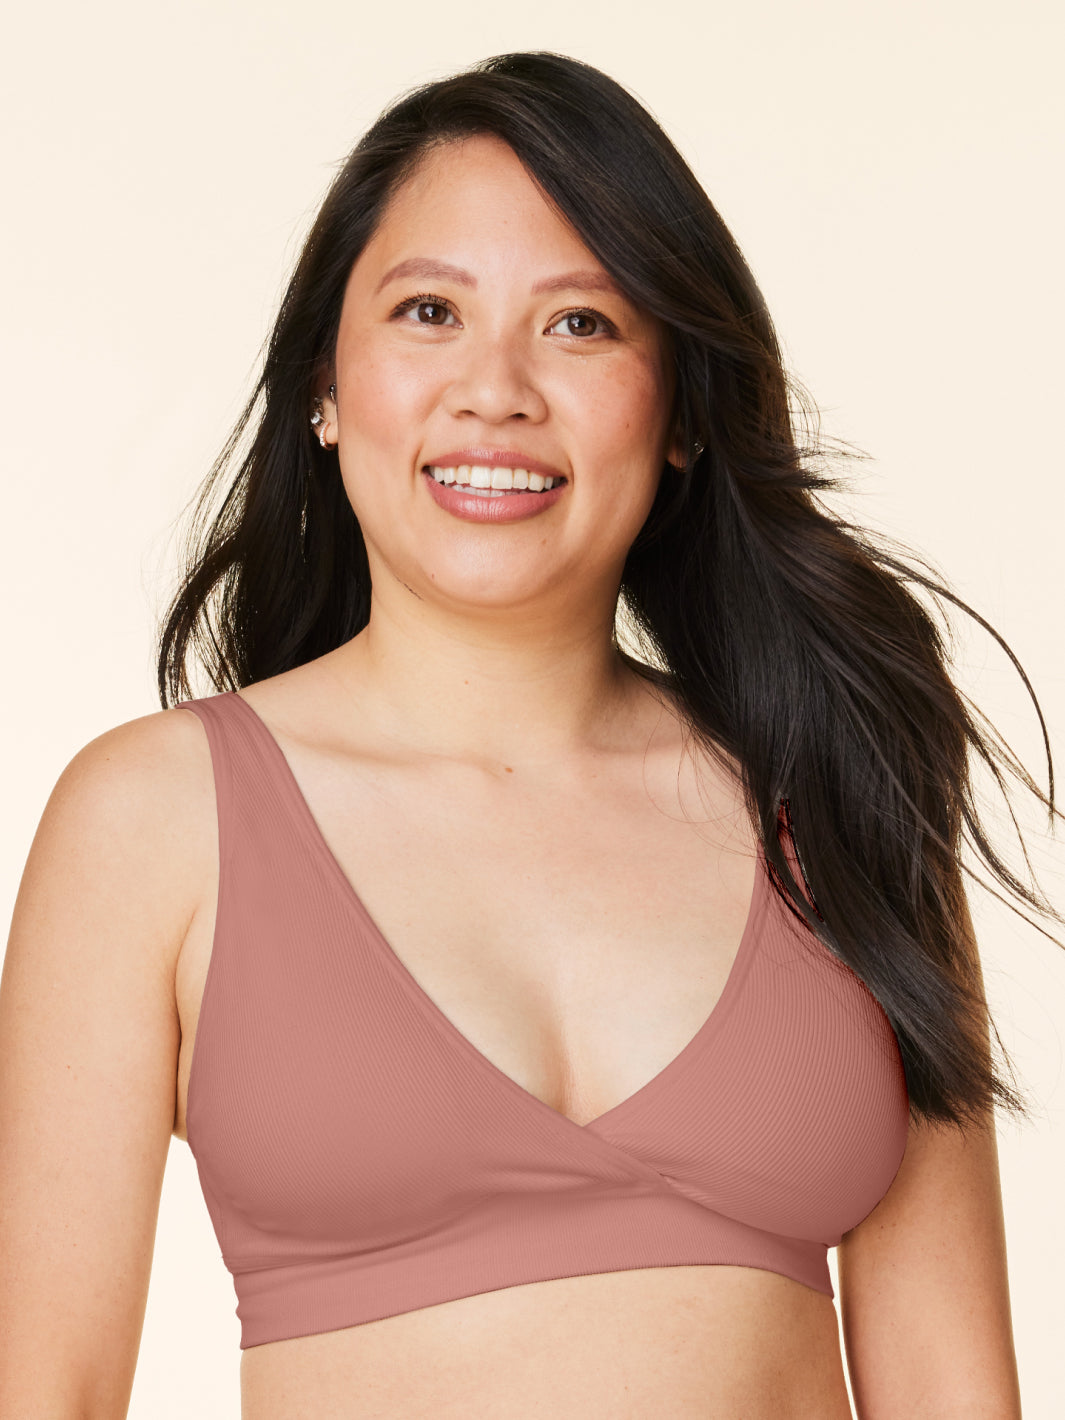 Quick tips to get the perfect bra 💖 #bravadodesignsid  #bravadodesignsindonesia #bravadodesigns